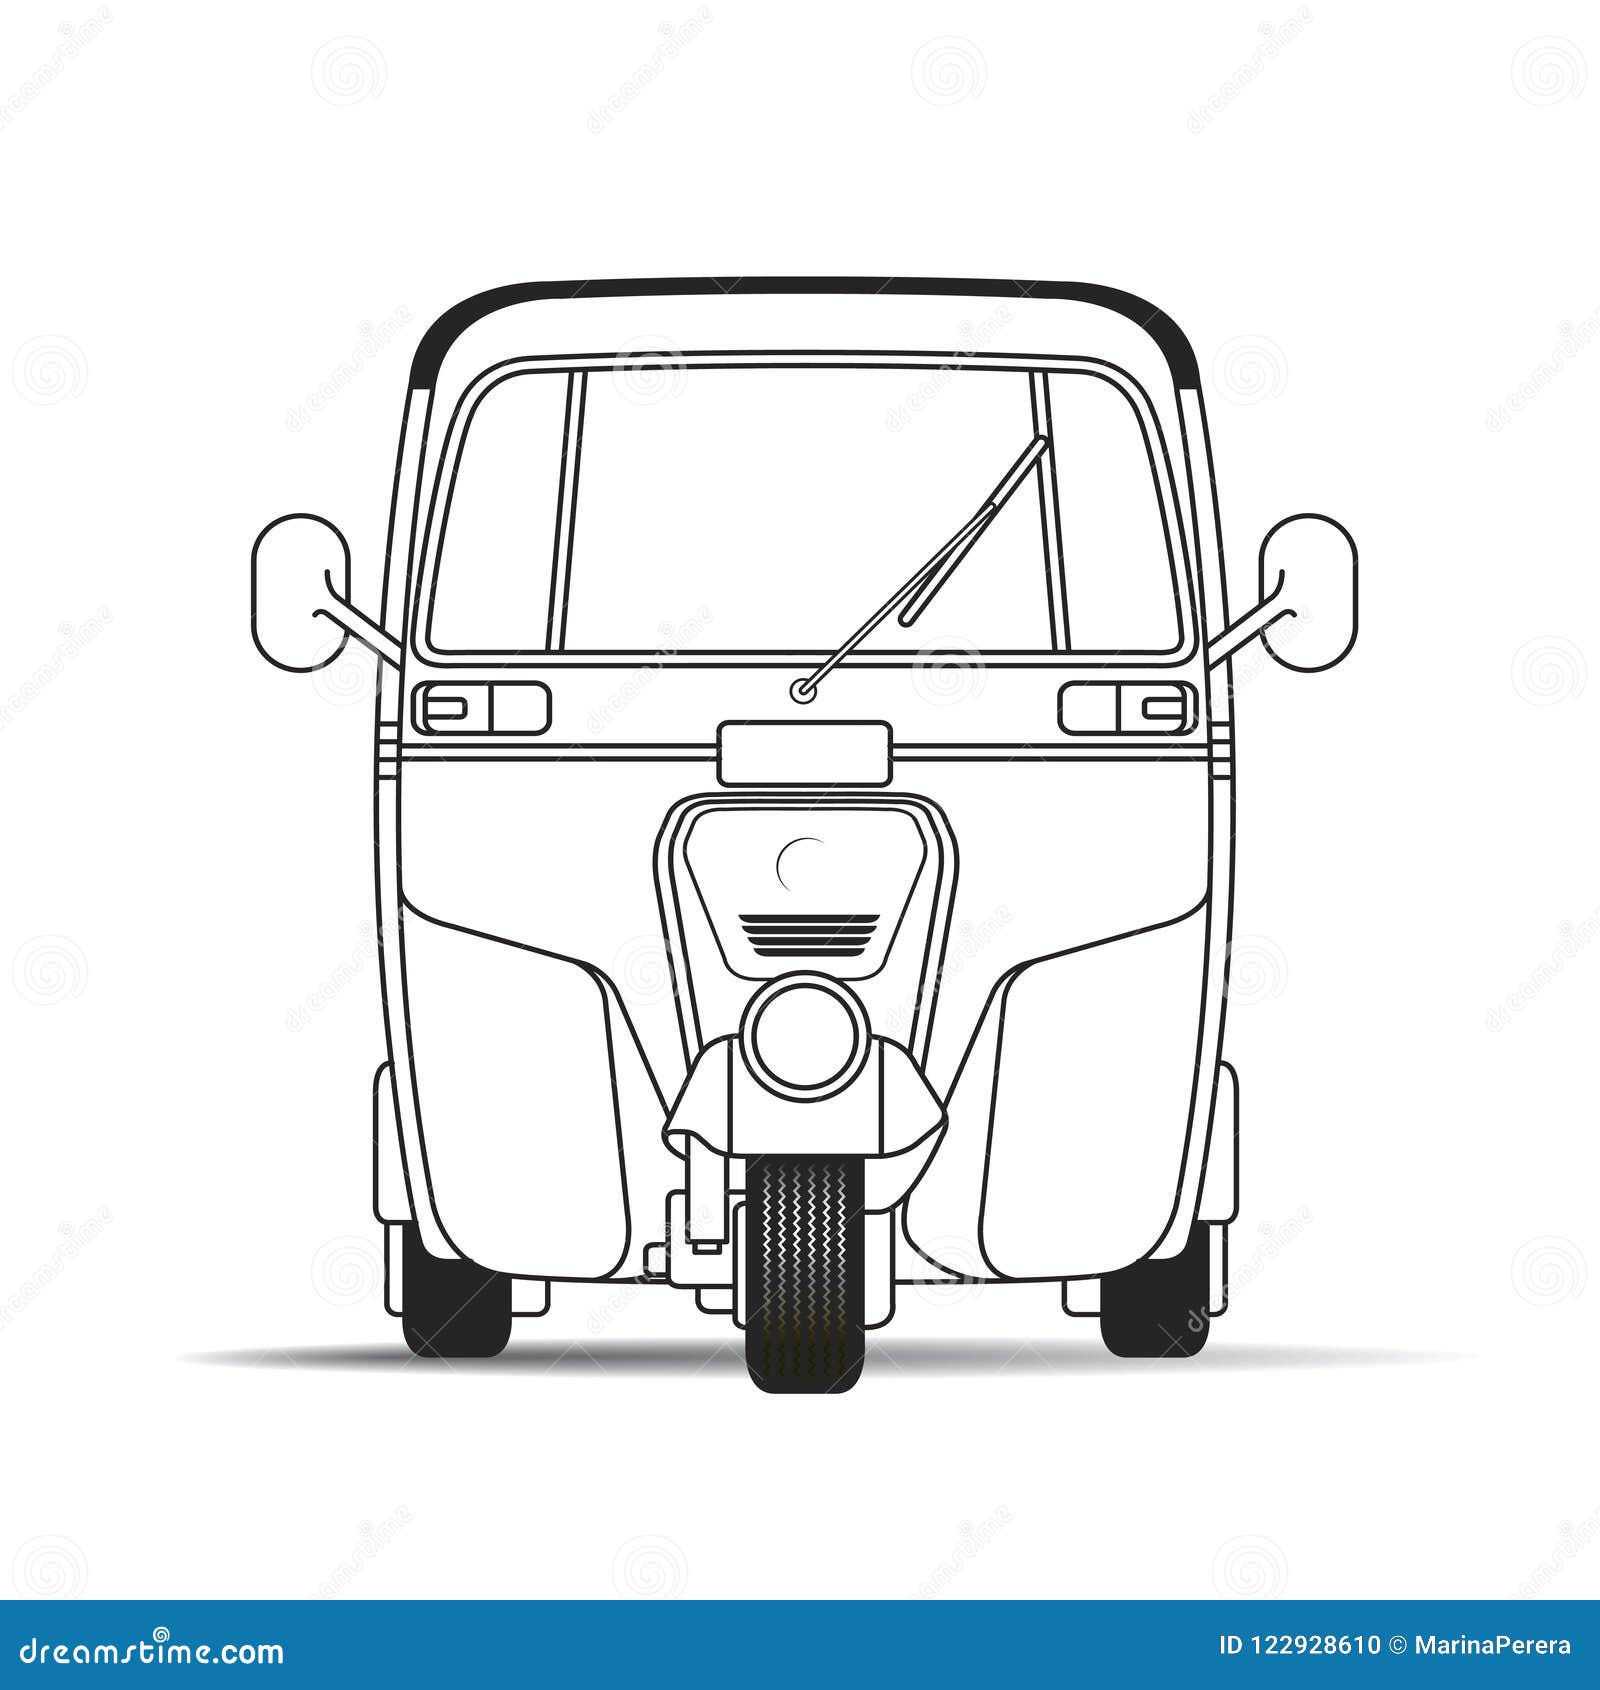 Learn to Draw Vehicles | Question of the day: Draw an Auto r… | Flickr